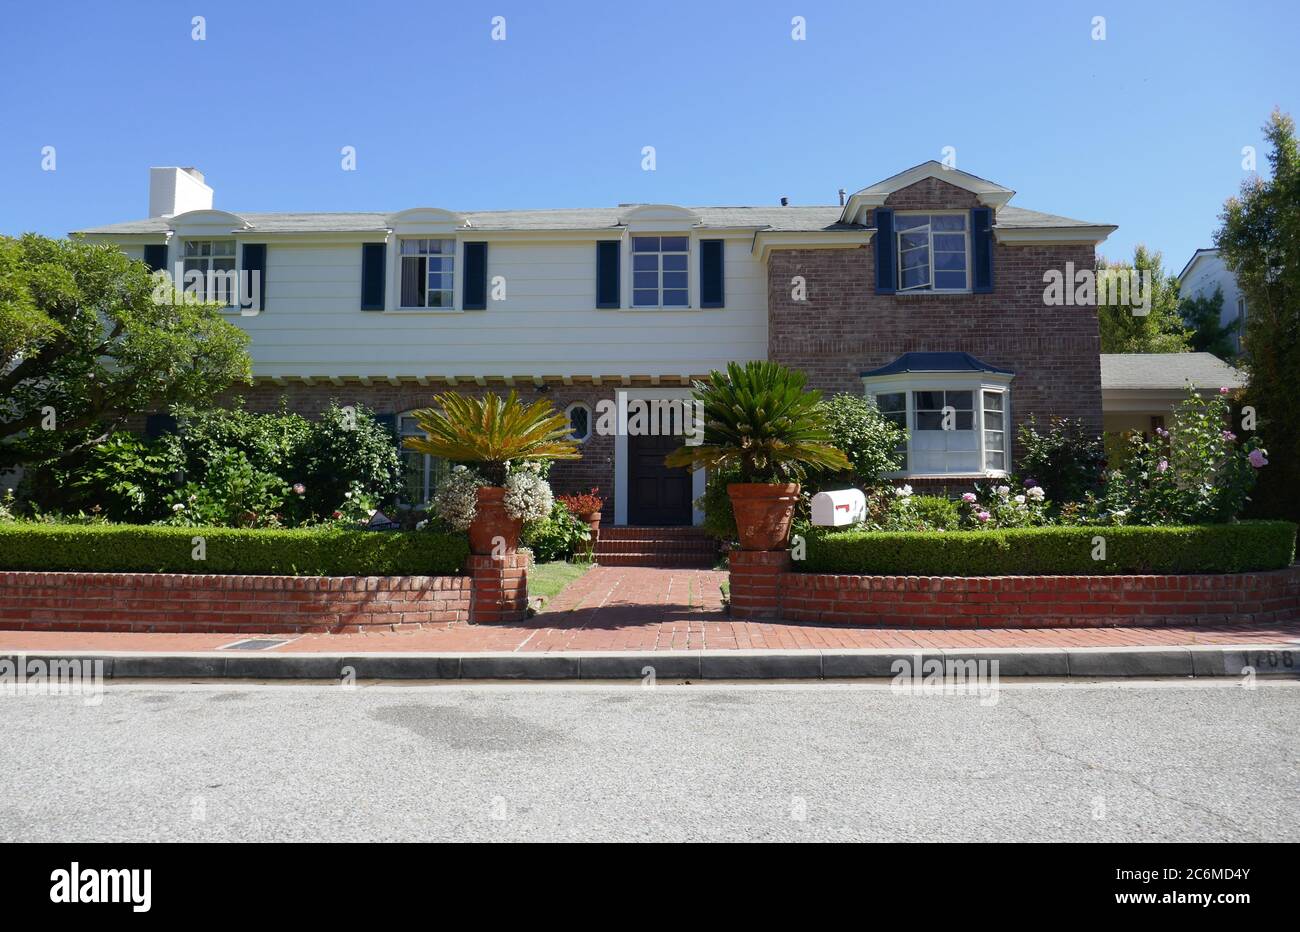 Beverly Hills, California, USA 10th July 2020 A general view of atmosphere of of Hedda Hopper's former home at 1708 Tropical Avenue on July 10, 2020 in Beverly Hills, California, USA. Photo by Barry King/Alamy Stock Photo Stock Photo